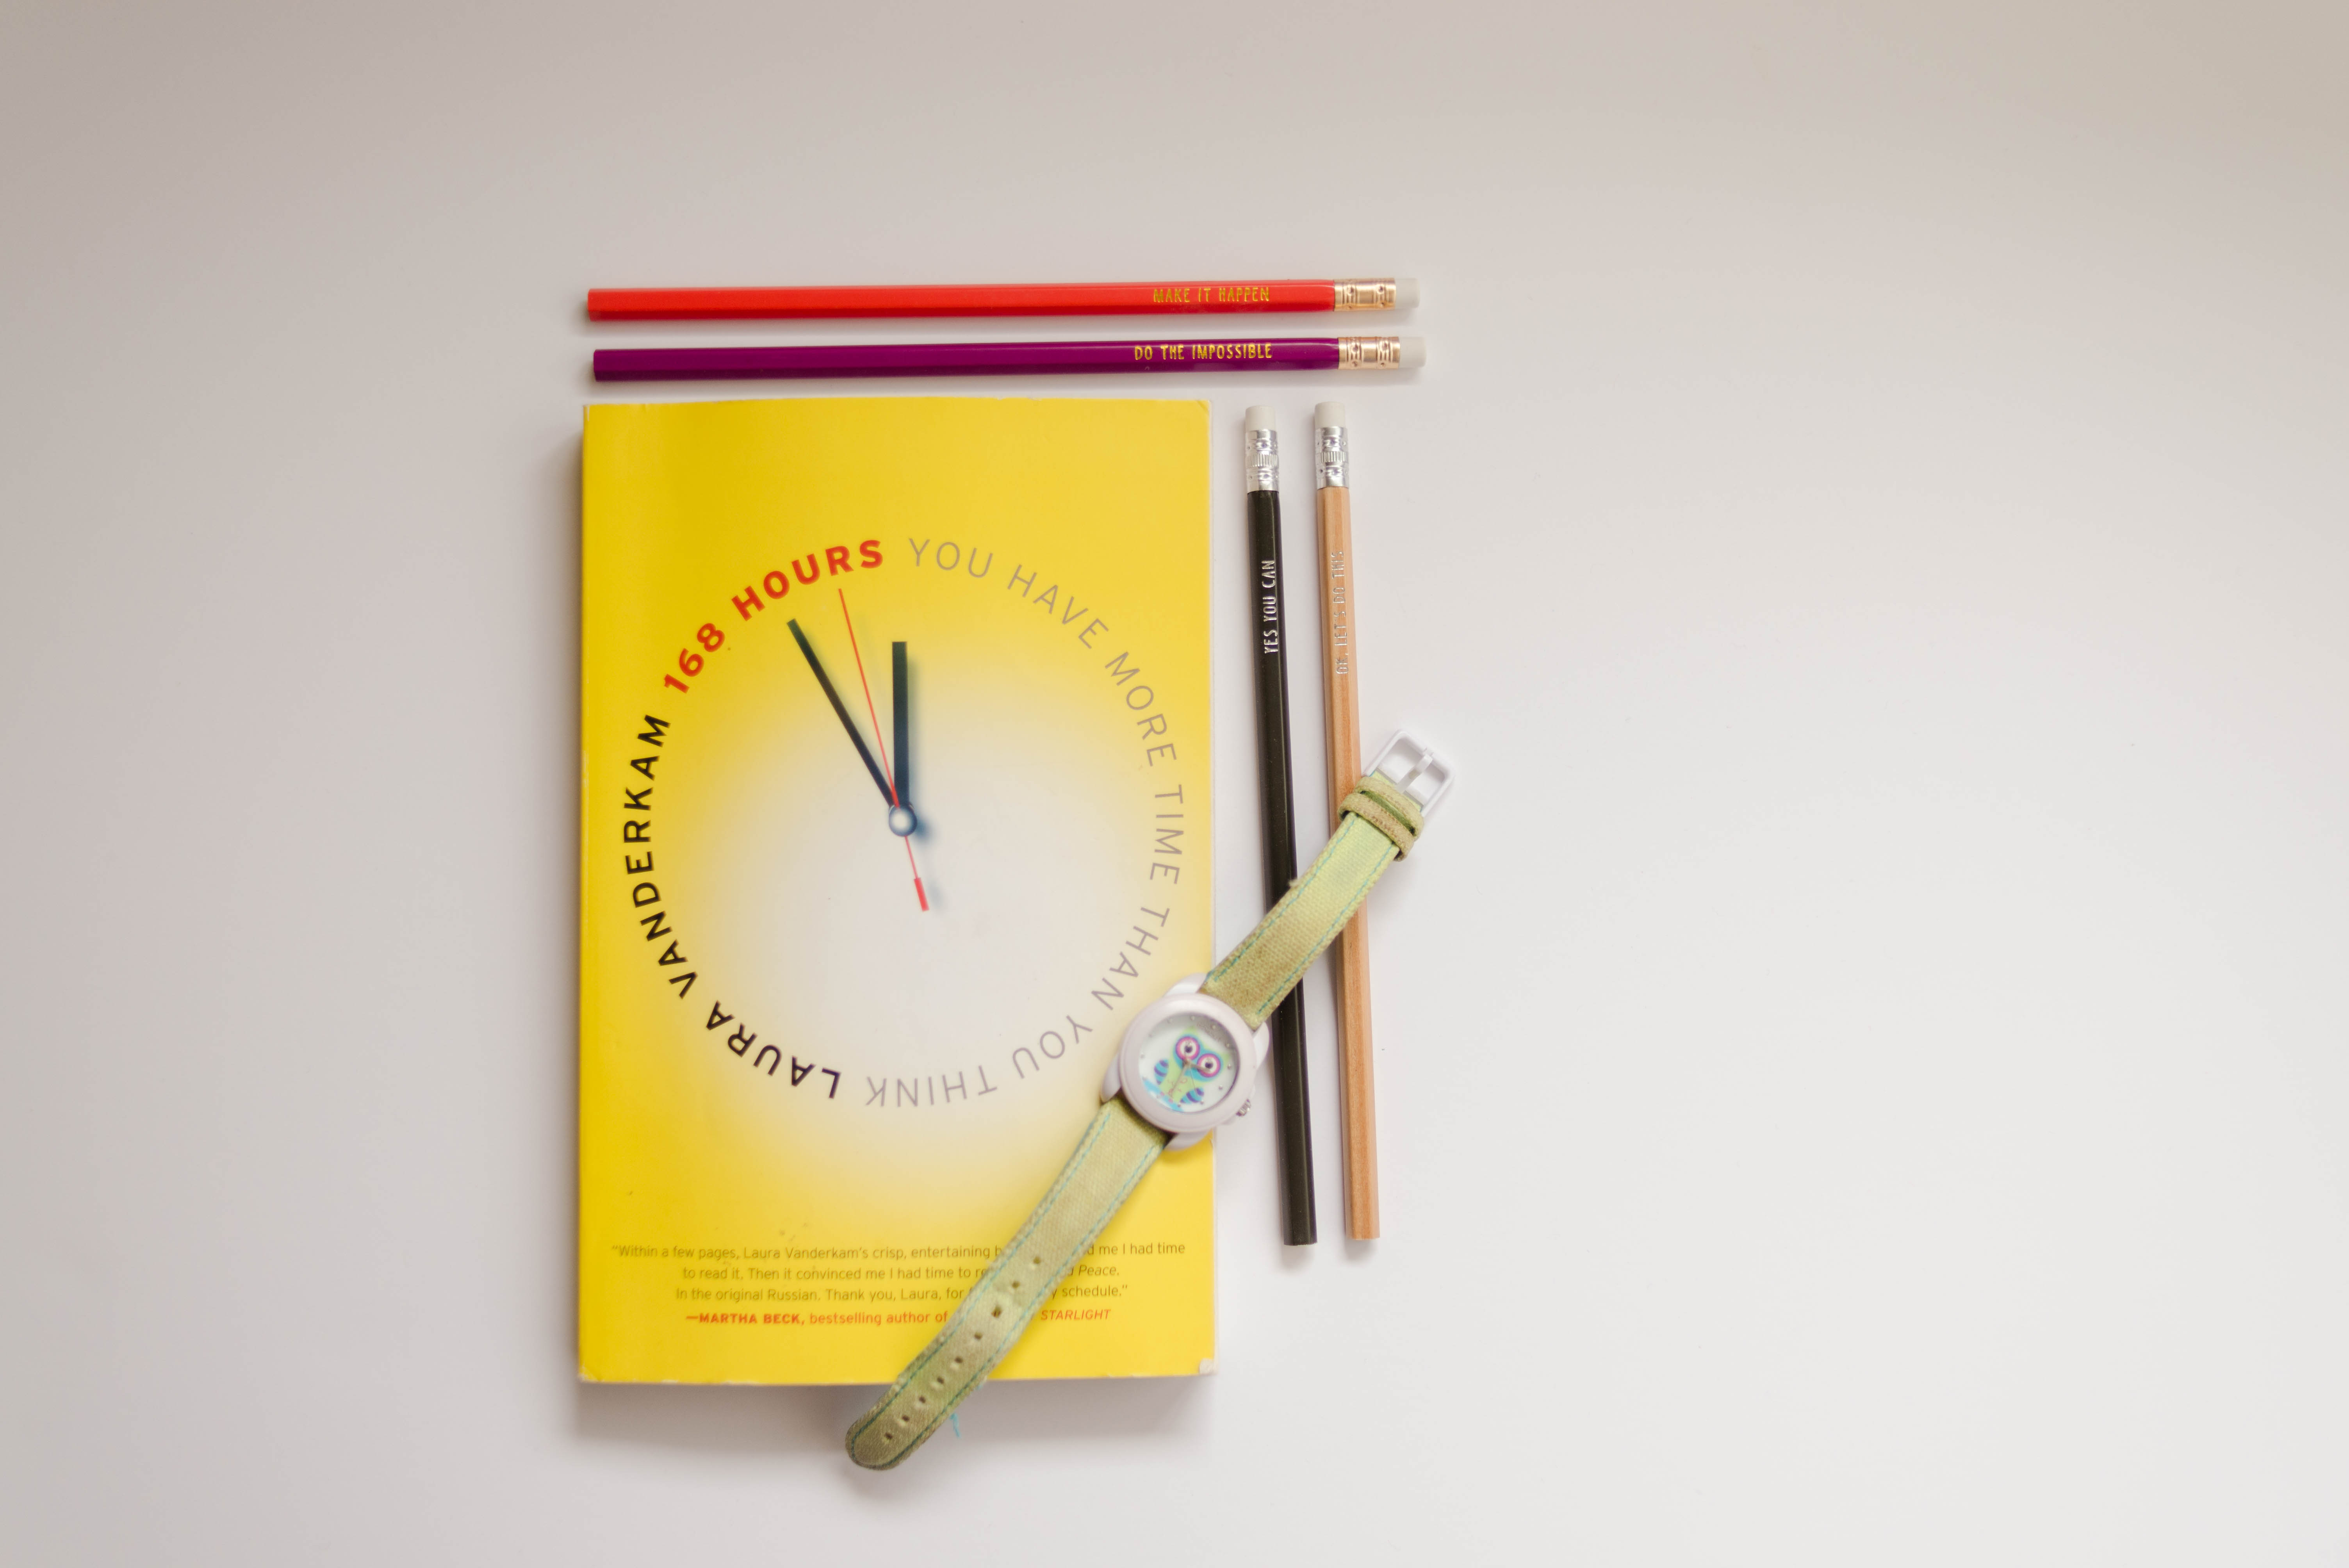 168 Hours. You have more time than you think by Laura Vanderkam. Book review by Linda Barry Photography. Click here to hear more about this life changing book!